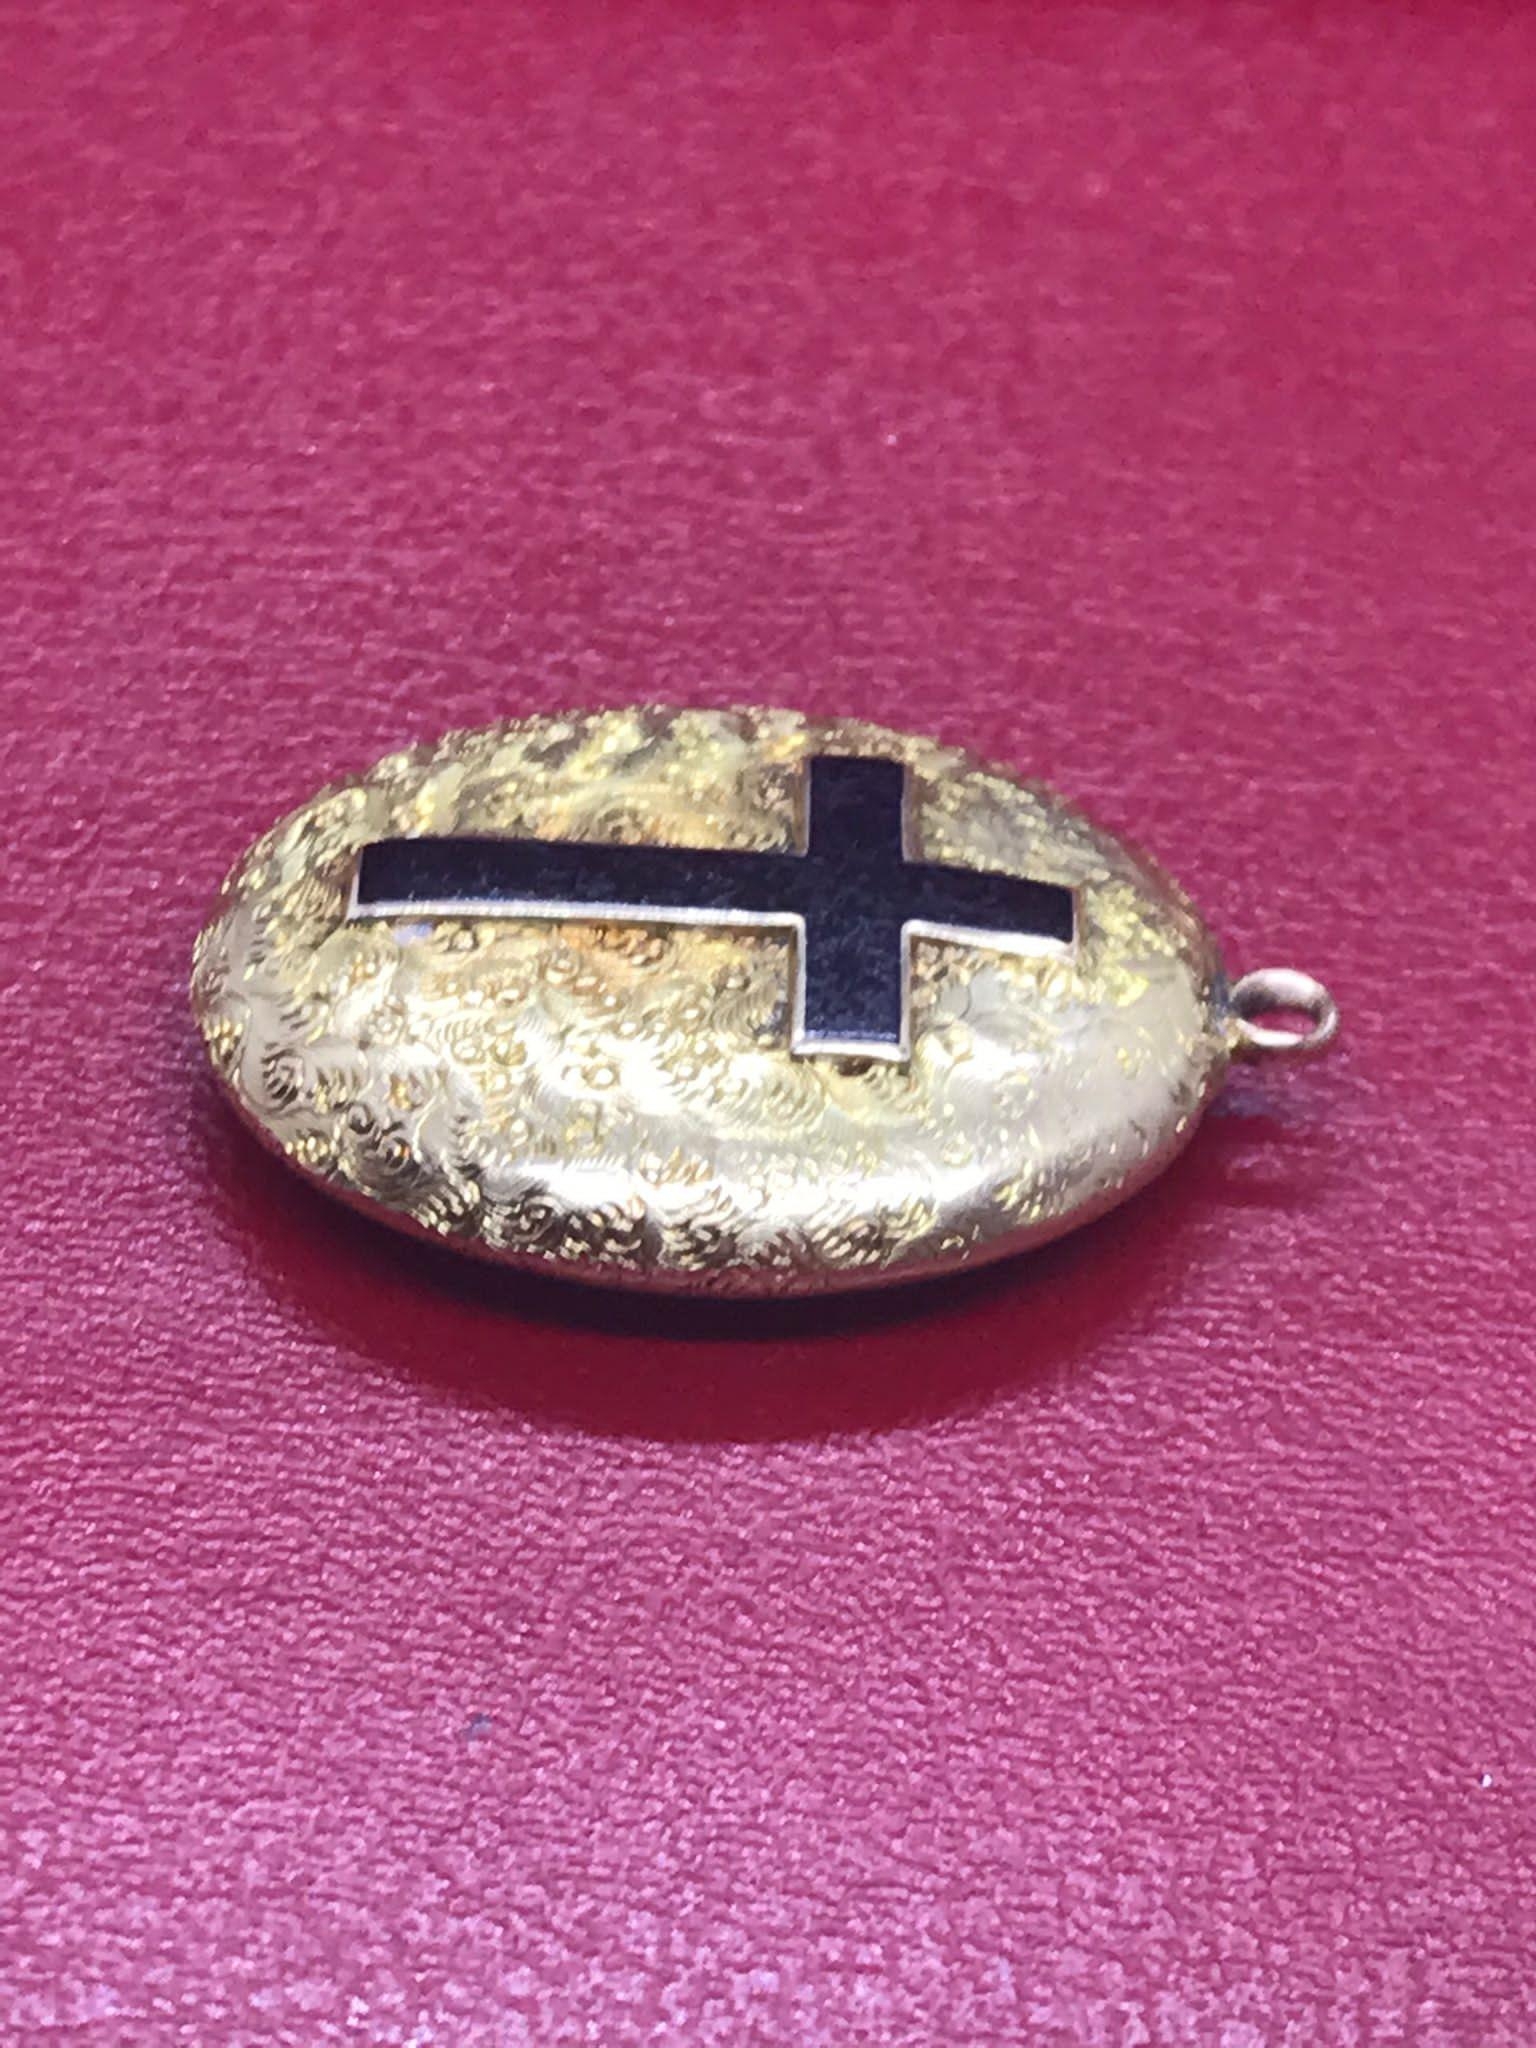 Antique 19th century enamel 15ct gold tested mourning locket pendant 3.1cm BY 2.3cm 4 grams - Image 8 of 12